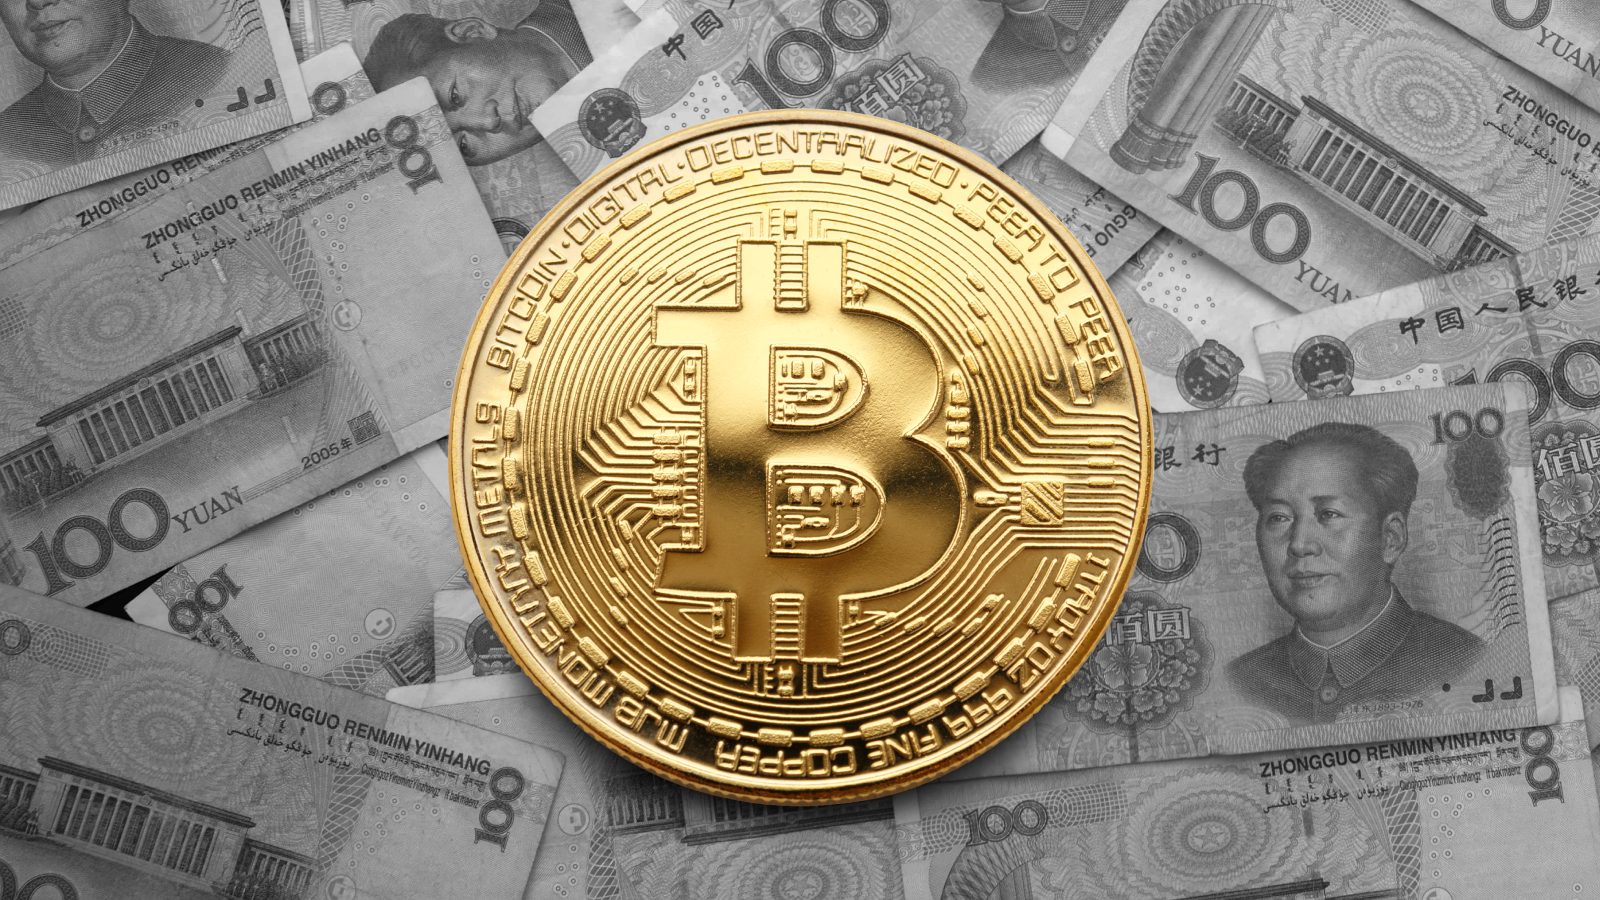 Shanghai_recognises_bitcoin_as_a_digital_currency_Monochrome_Digest.png